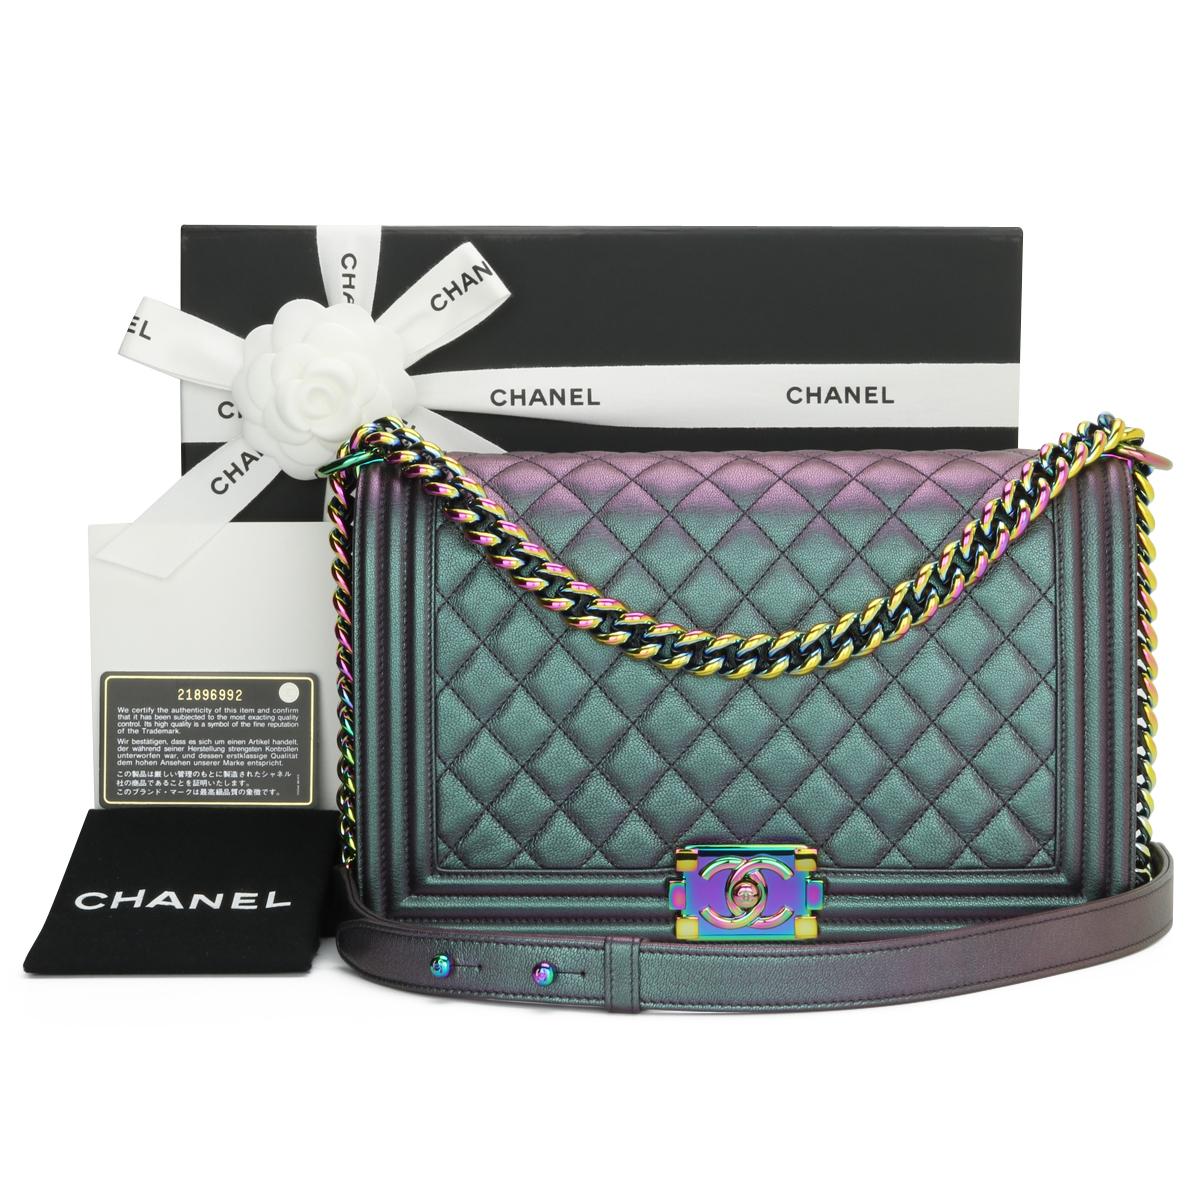 CHANEL New Medium Boy Bag Quilted Iridescent Purple Goatskin with Rainbow Hardware 2016.

This stunning bag is still in pristine - never worn condition, the bag still holds its original shape, and the hardware is still very clean and shiny.

It is a